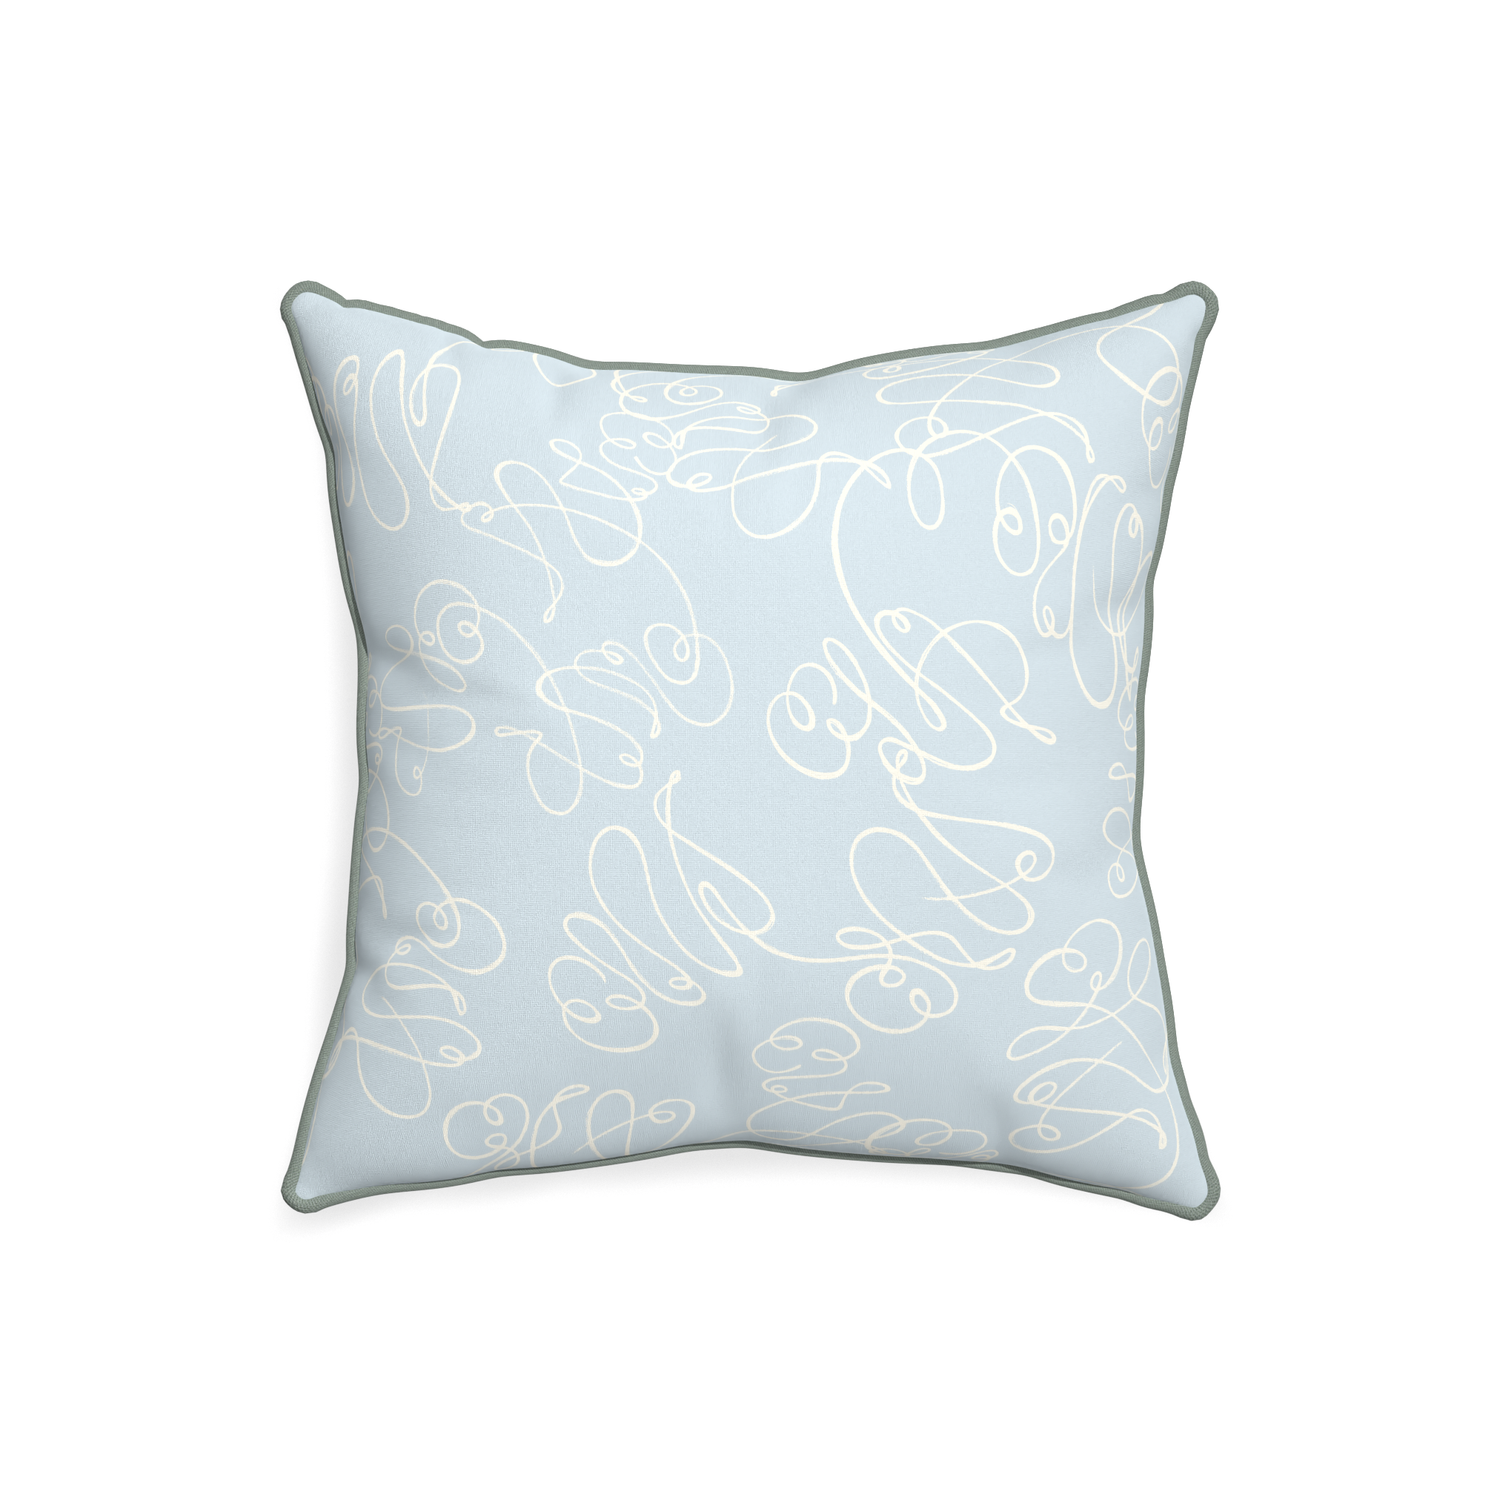 20-square mirabella custom powder blue abstractpillow with sage piping on white background